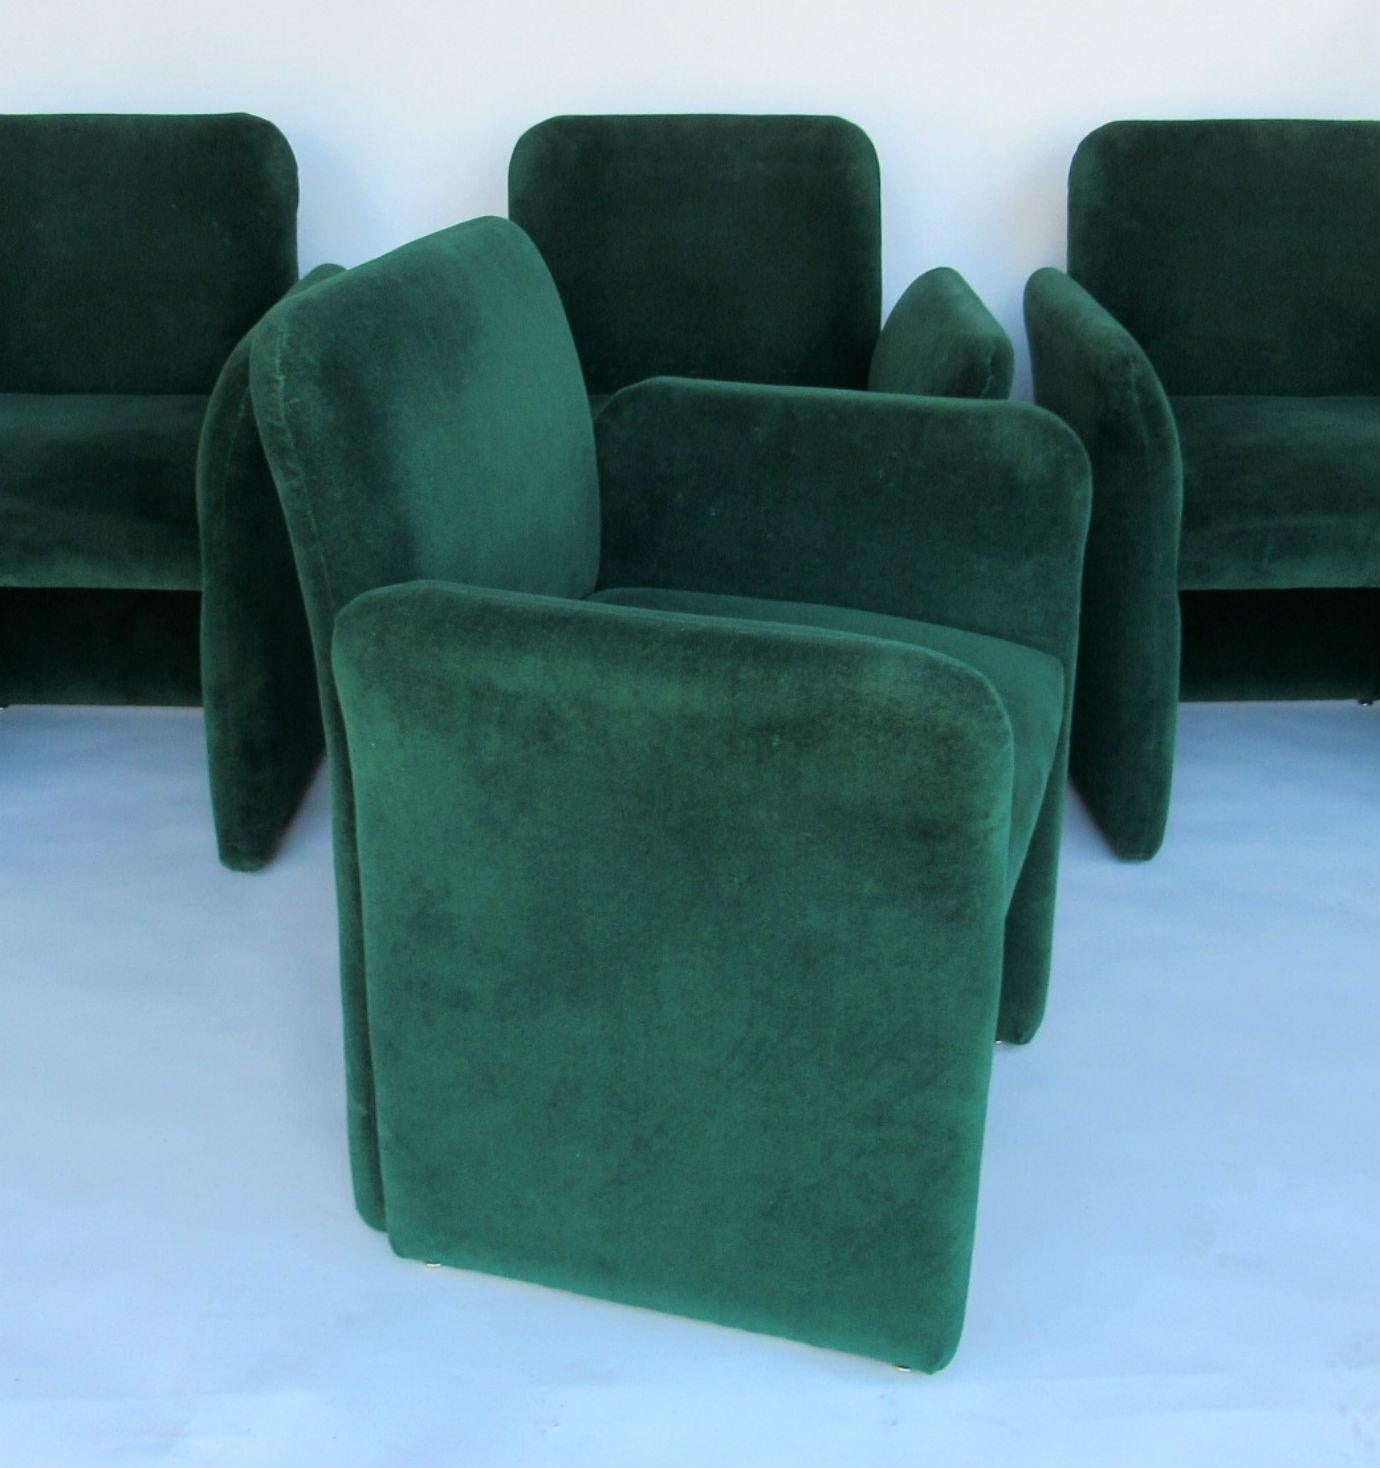 Emerald Green Velvet Upholstered Armchairs by Leon Rosen for Pace 1980s.  Set of Four chairs with gently outwardly curved arms and green velvet upholstery.  
 